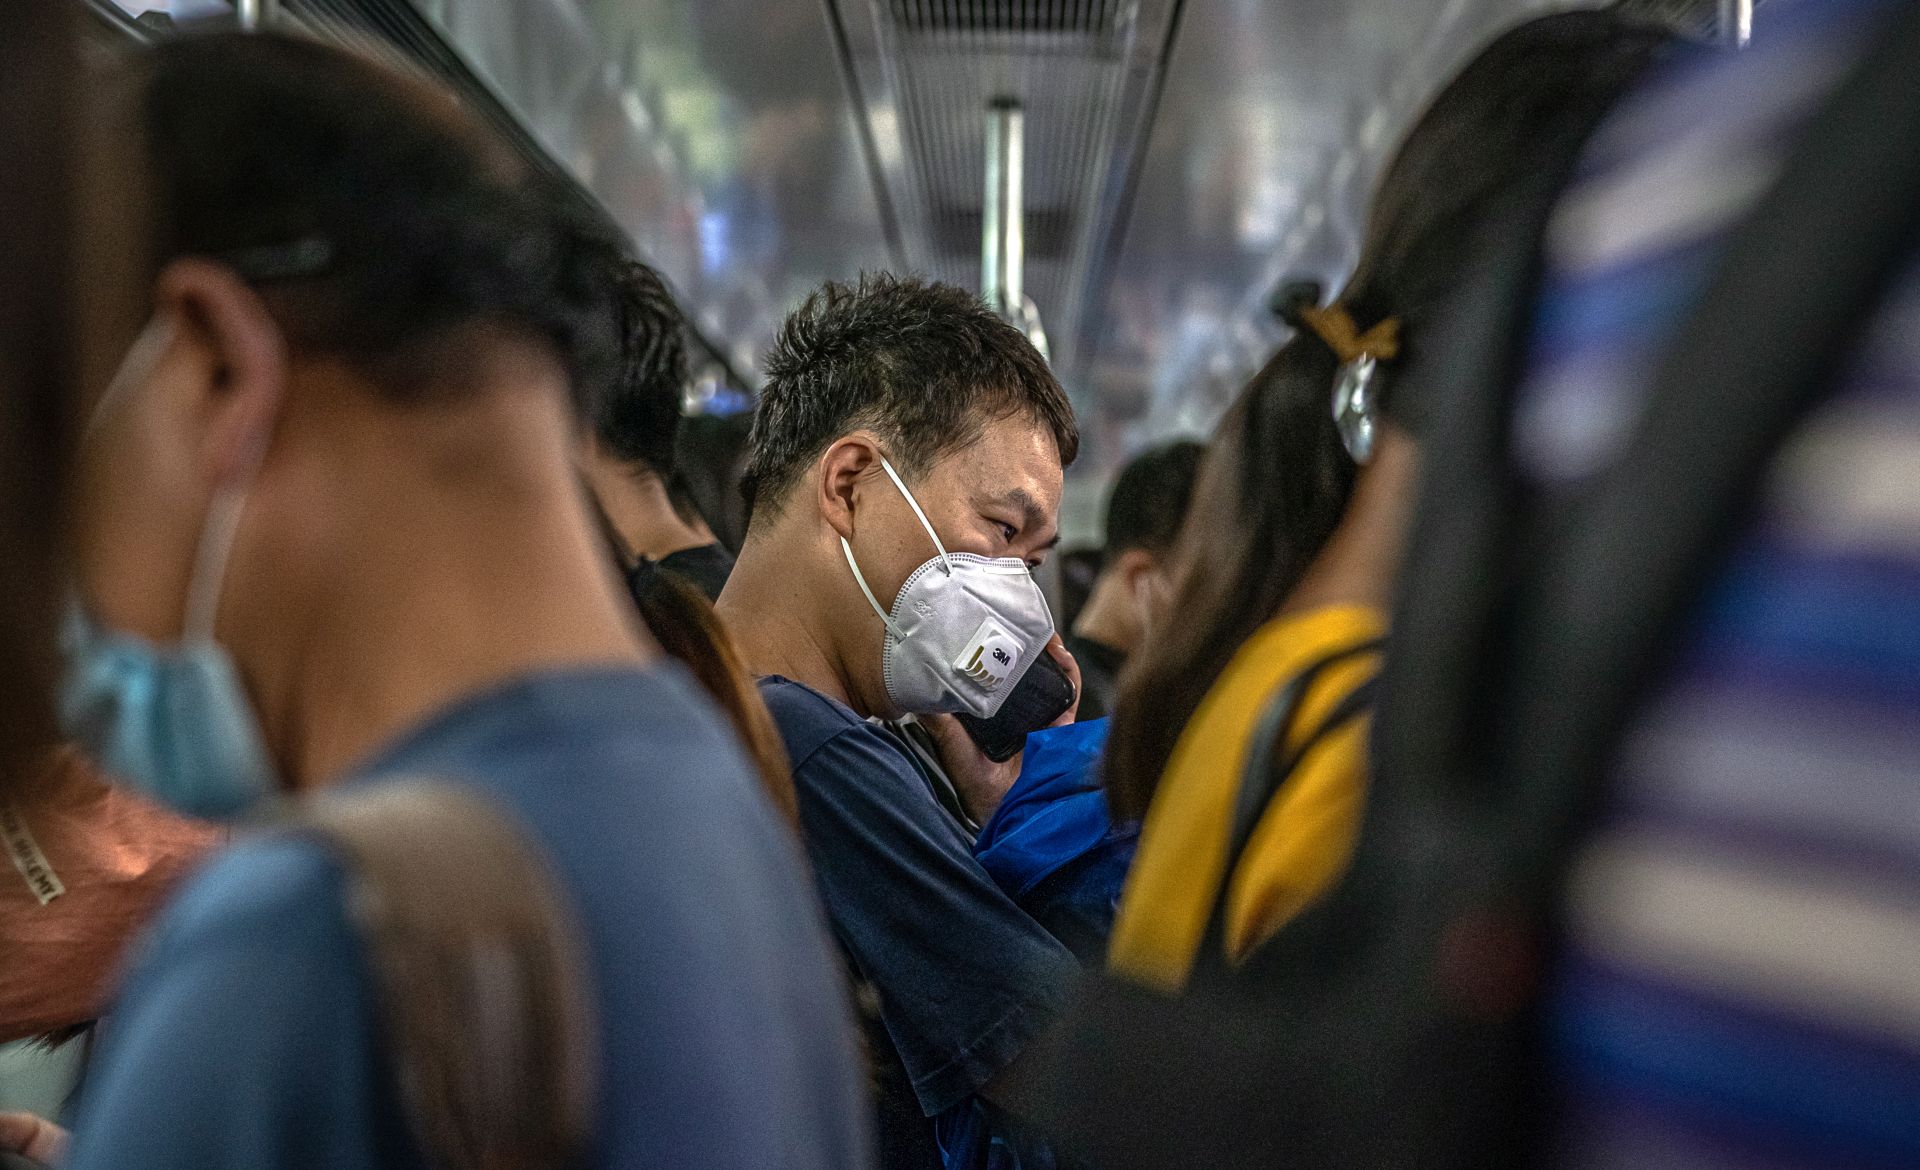 epa08493928 A man wearing a protective face mask rides the subway during an evening rush hour, in Beijing, China, 18 June 2020. Chinese health authorities said that they received reports of 28 new confirmed COVID-19 cases on 17 June of which 21 cases were reported in Beijing. Authorities gave COVID-19 nucleic acid tests to 356,000 people since 13 June, according to the city's government officials, as the number of new coronavirus cases is continuing to increase in the city.  EPA/ROMAN PILIPEY